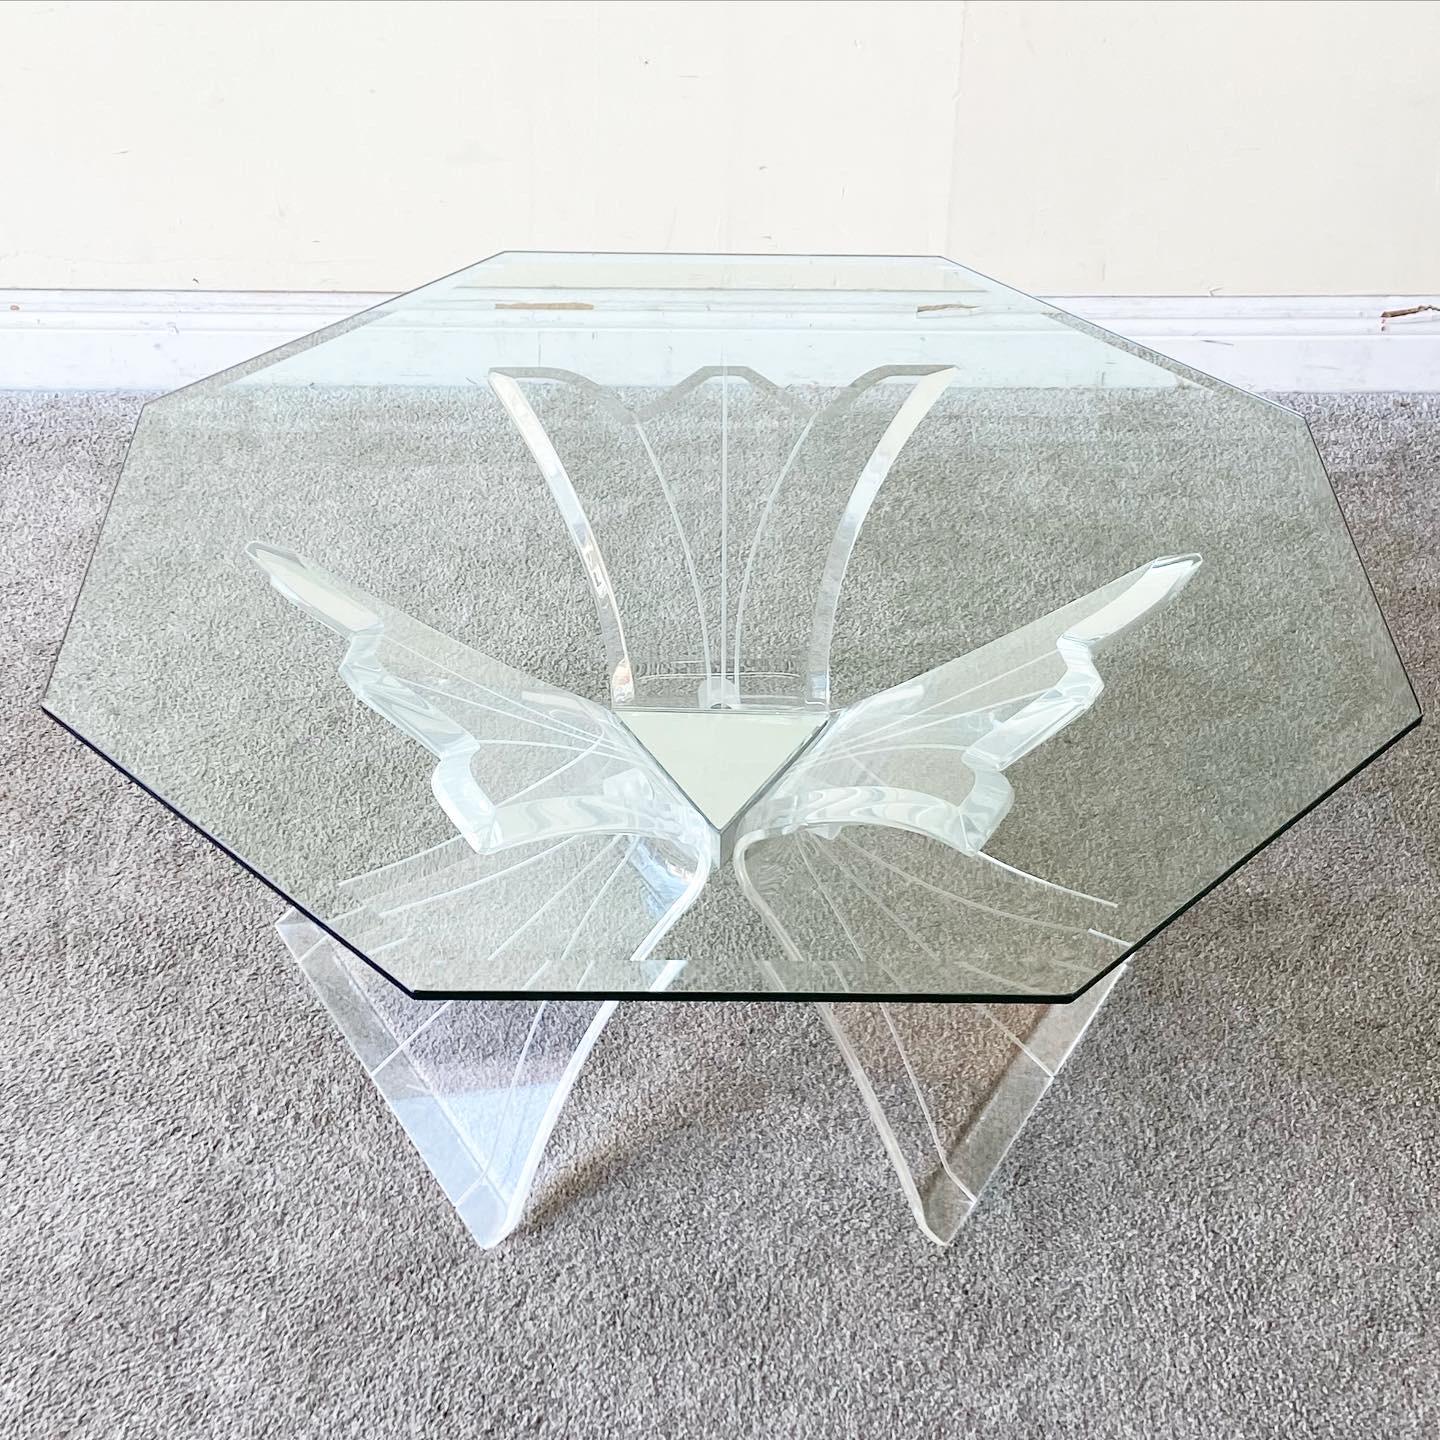 Incredible postmodern lucite base coffee table. Features a beveled octagonal glass top.

Additional information:
Material: Glass, Lucite
Color: Transparent
Style: Postmodern
Time Period: 1980s
Dimension: 38ʺ W × 38ʺ D × 15.75ʺ H